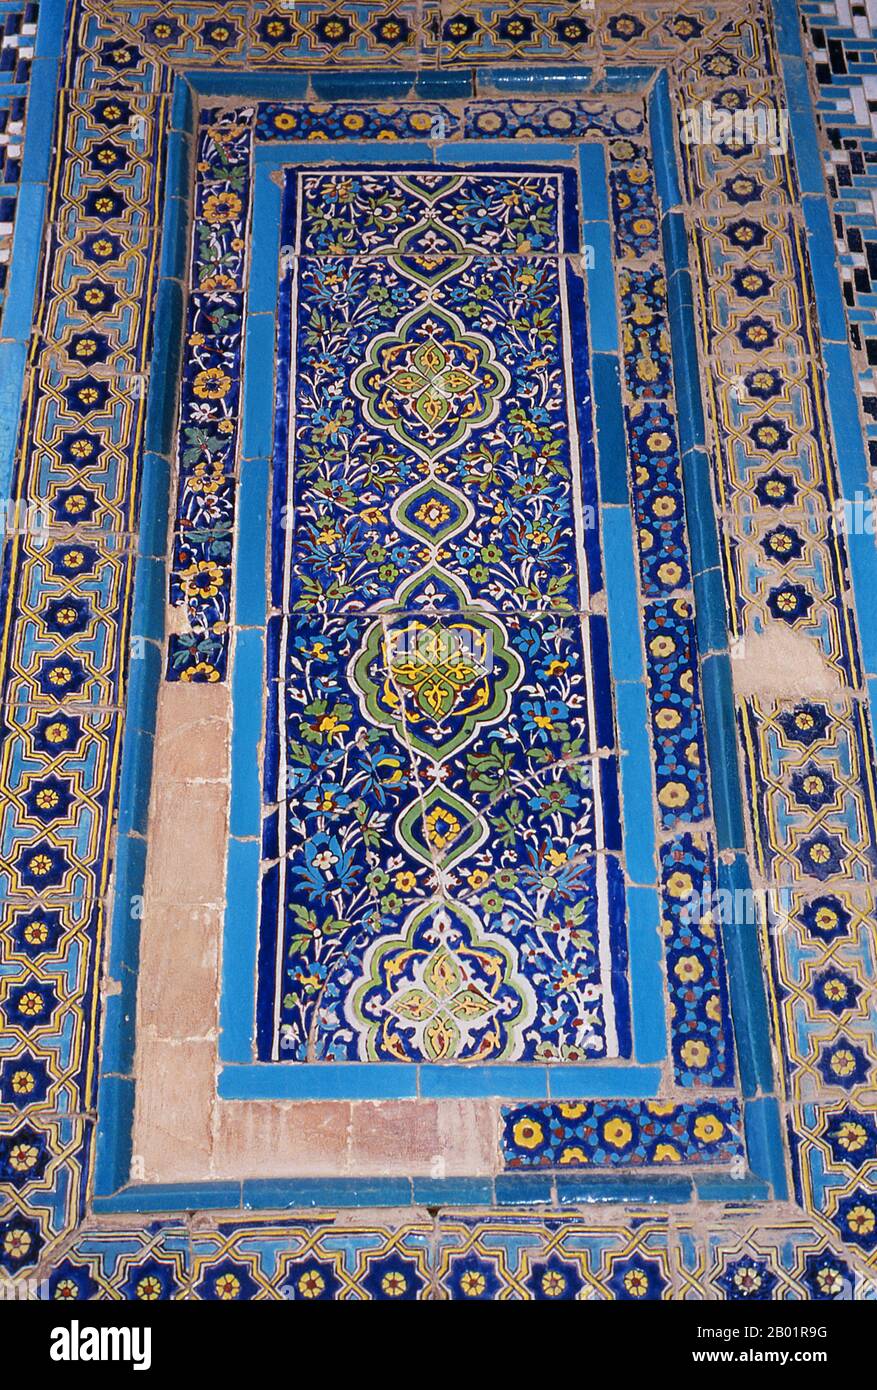 Uzbekistan: Wall arabesque detail in Shah-i-Zinda, Samarkand.  Shah-i-Zinda ('The Living King') is a necropolis in the north-eastern part of Samarkand.  The Shah-i-Zinda Ensemble includes mausoleums and other ritual buildings from the 9-14th and 19th centuries. The name Shah-i-Zinda is connected with the legend that Kusam ibn Abbas, a cousin of the prophet Muhammad is buried here. It is believed that he came to Samarkand with the Arab invasion in the 7th century to preach Islam. Popular legends speak that he was beheaded by Zoroastrian fire-worshippers for his faith. Stock Photo